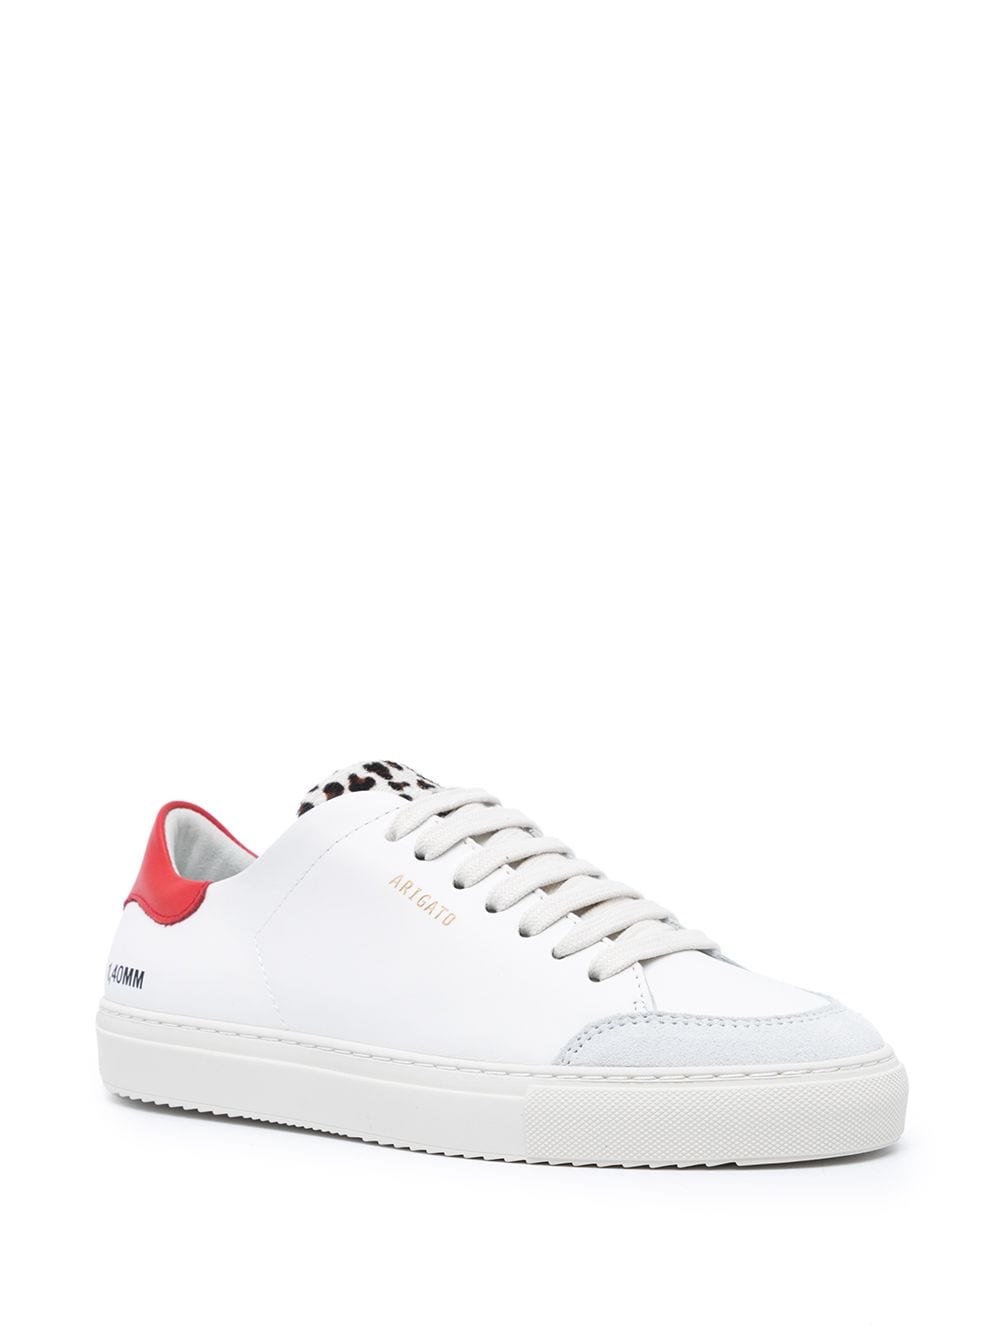 Axel Arigato leopard-tongue Leather Trainers - Farfetch